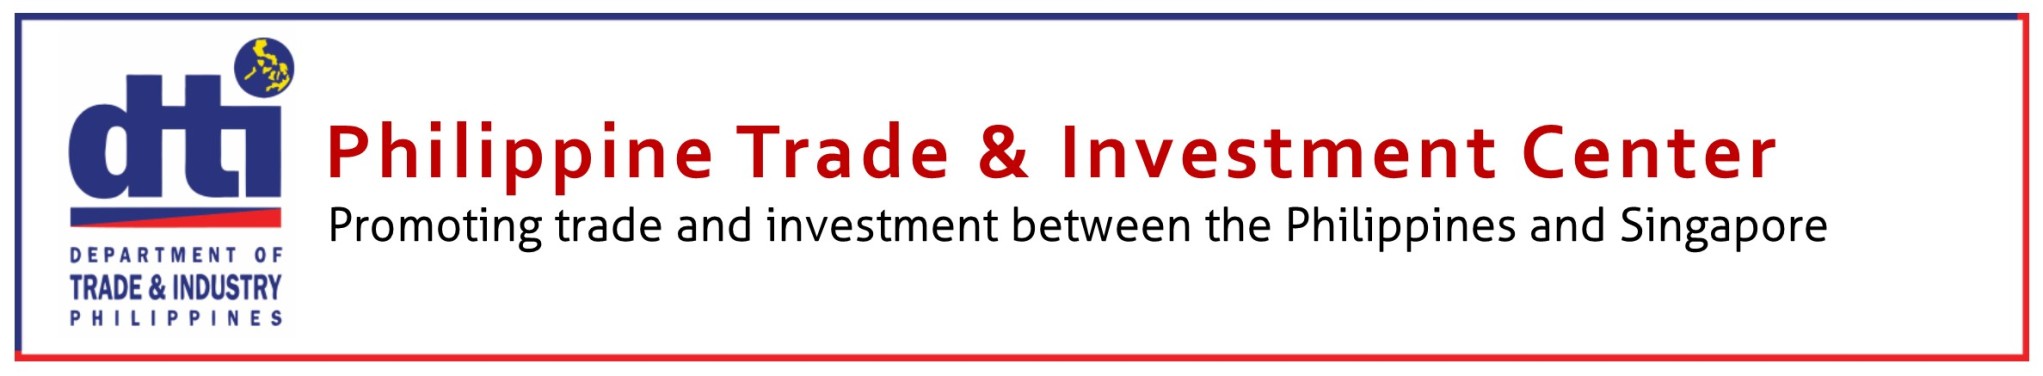 THE PHILIPPINE TRADE & INVESTMENT CENTRE